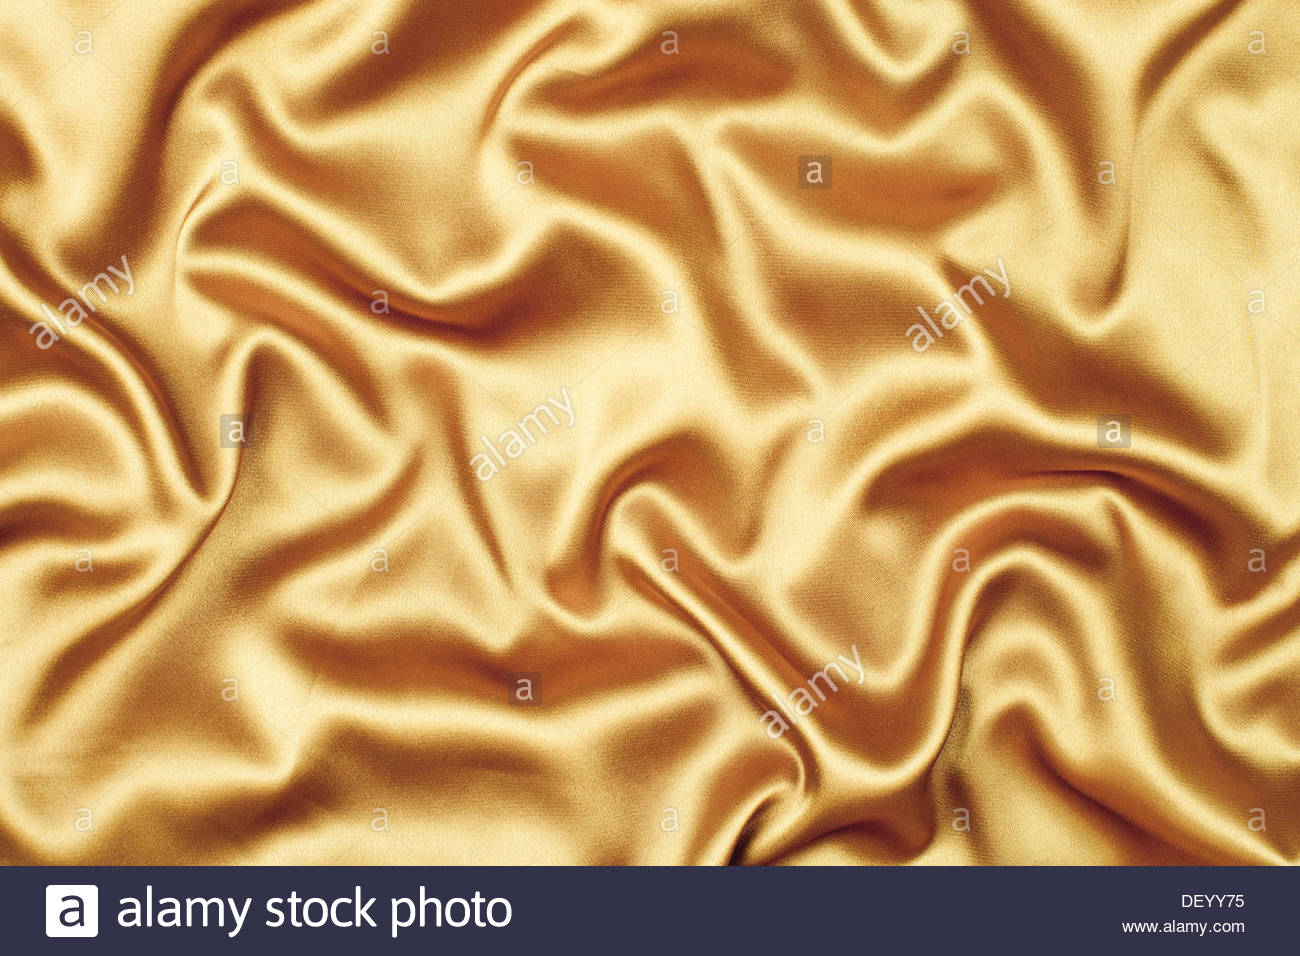 Gold Satin Or Silk Fabric Background Stock Photo